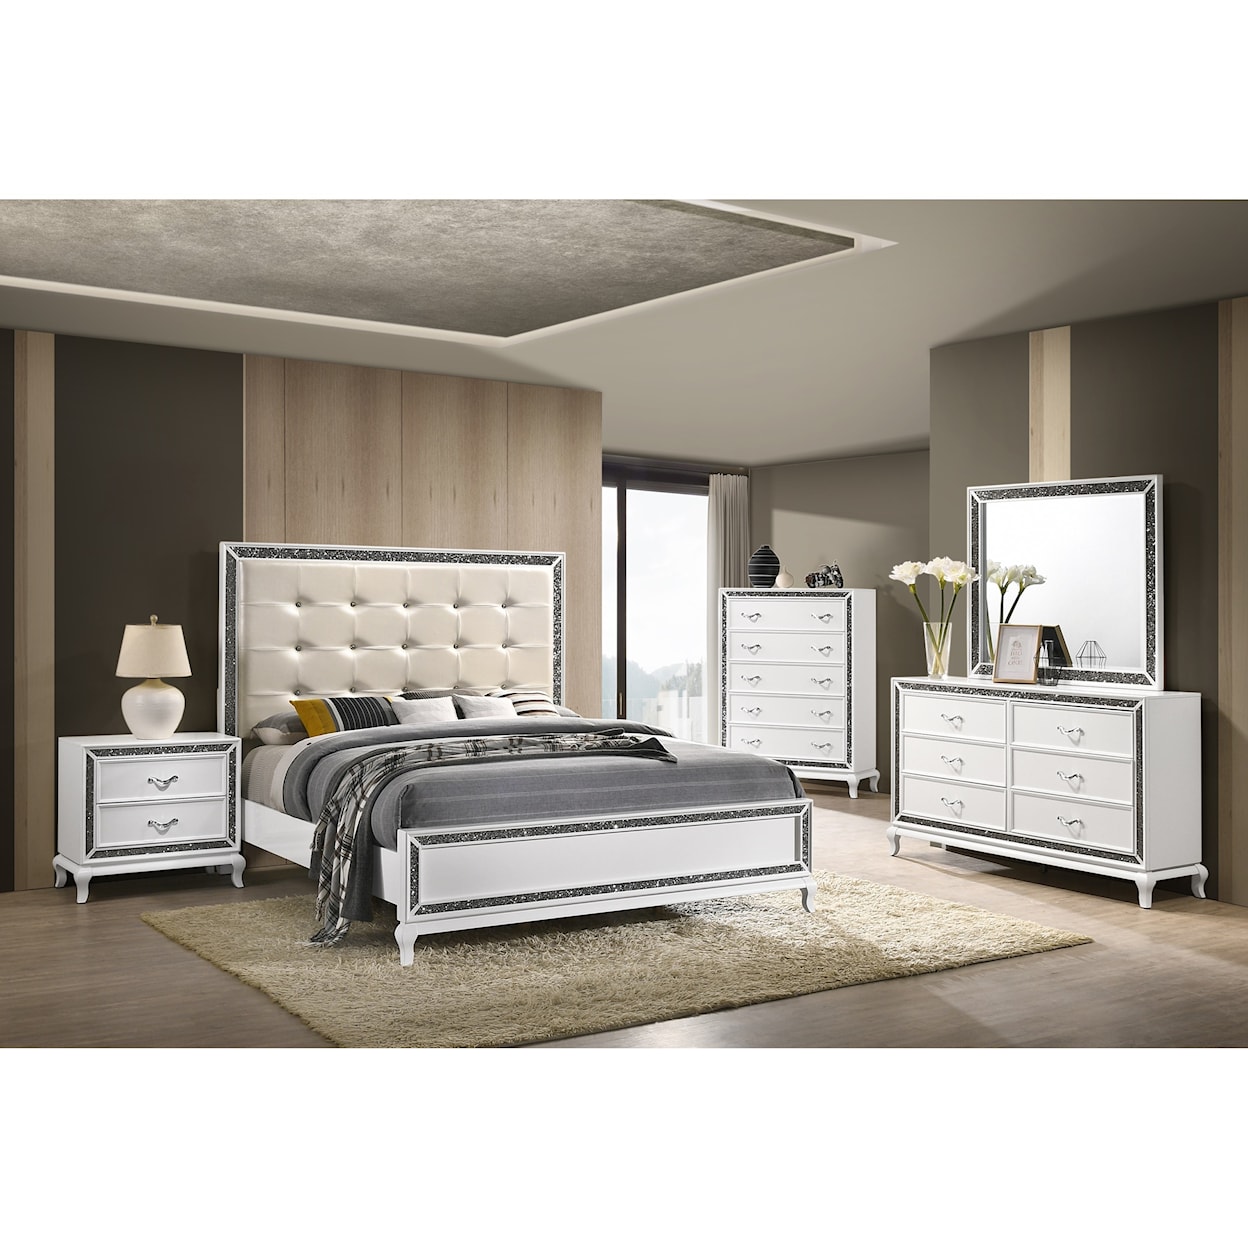 New Classic Park Imperial Full Bedroom Group